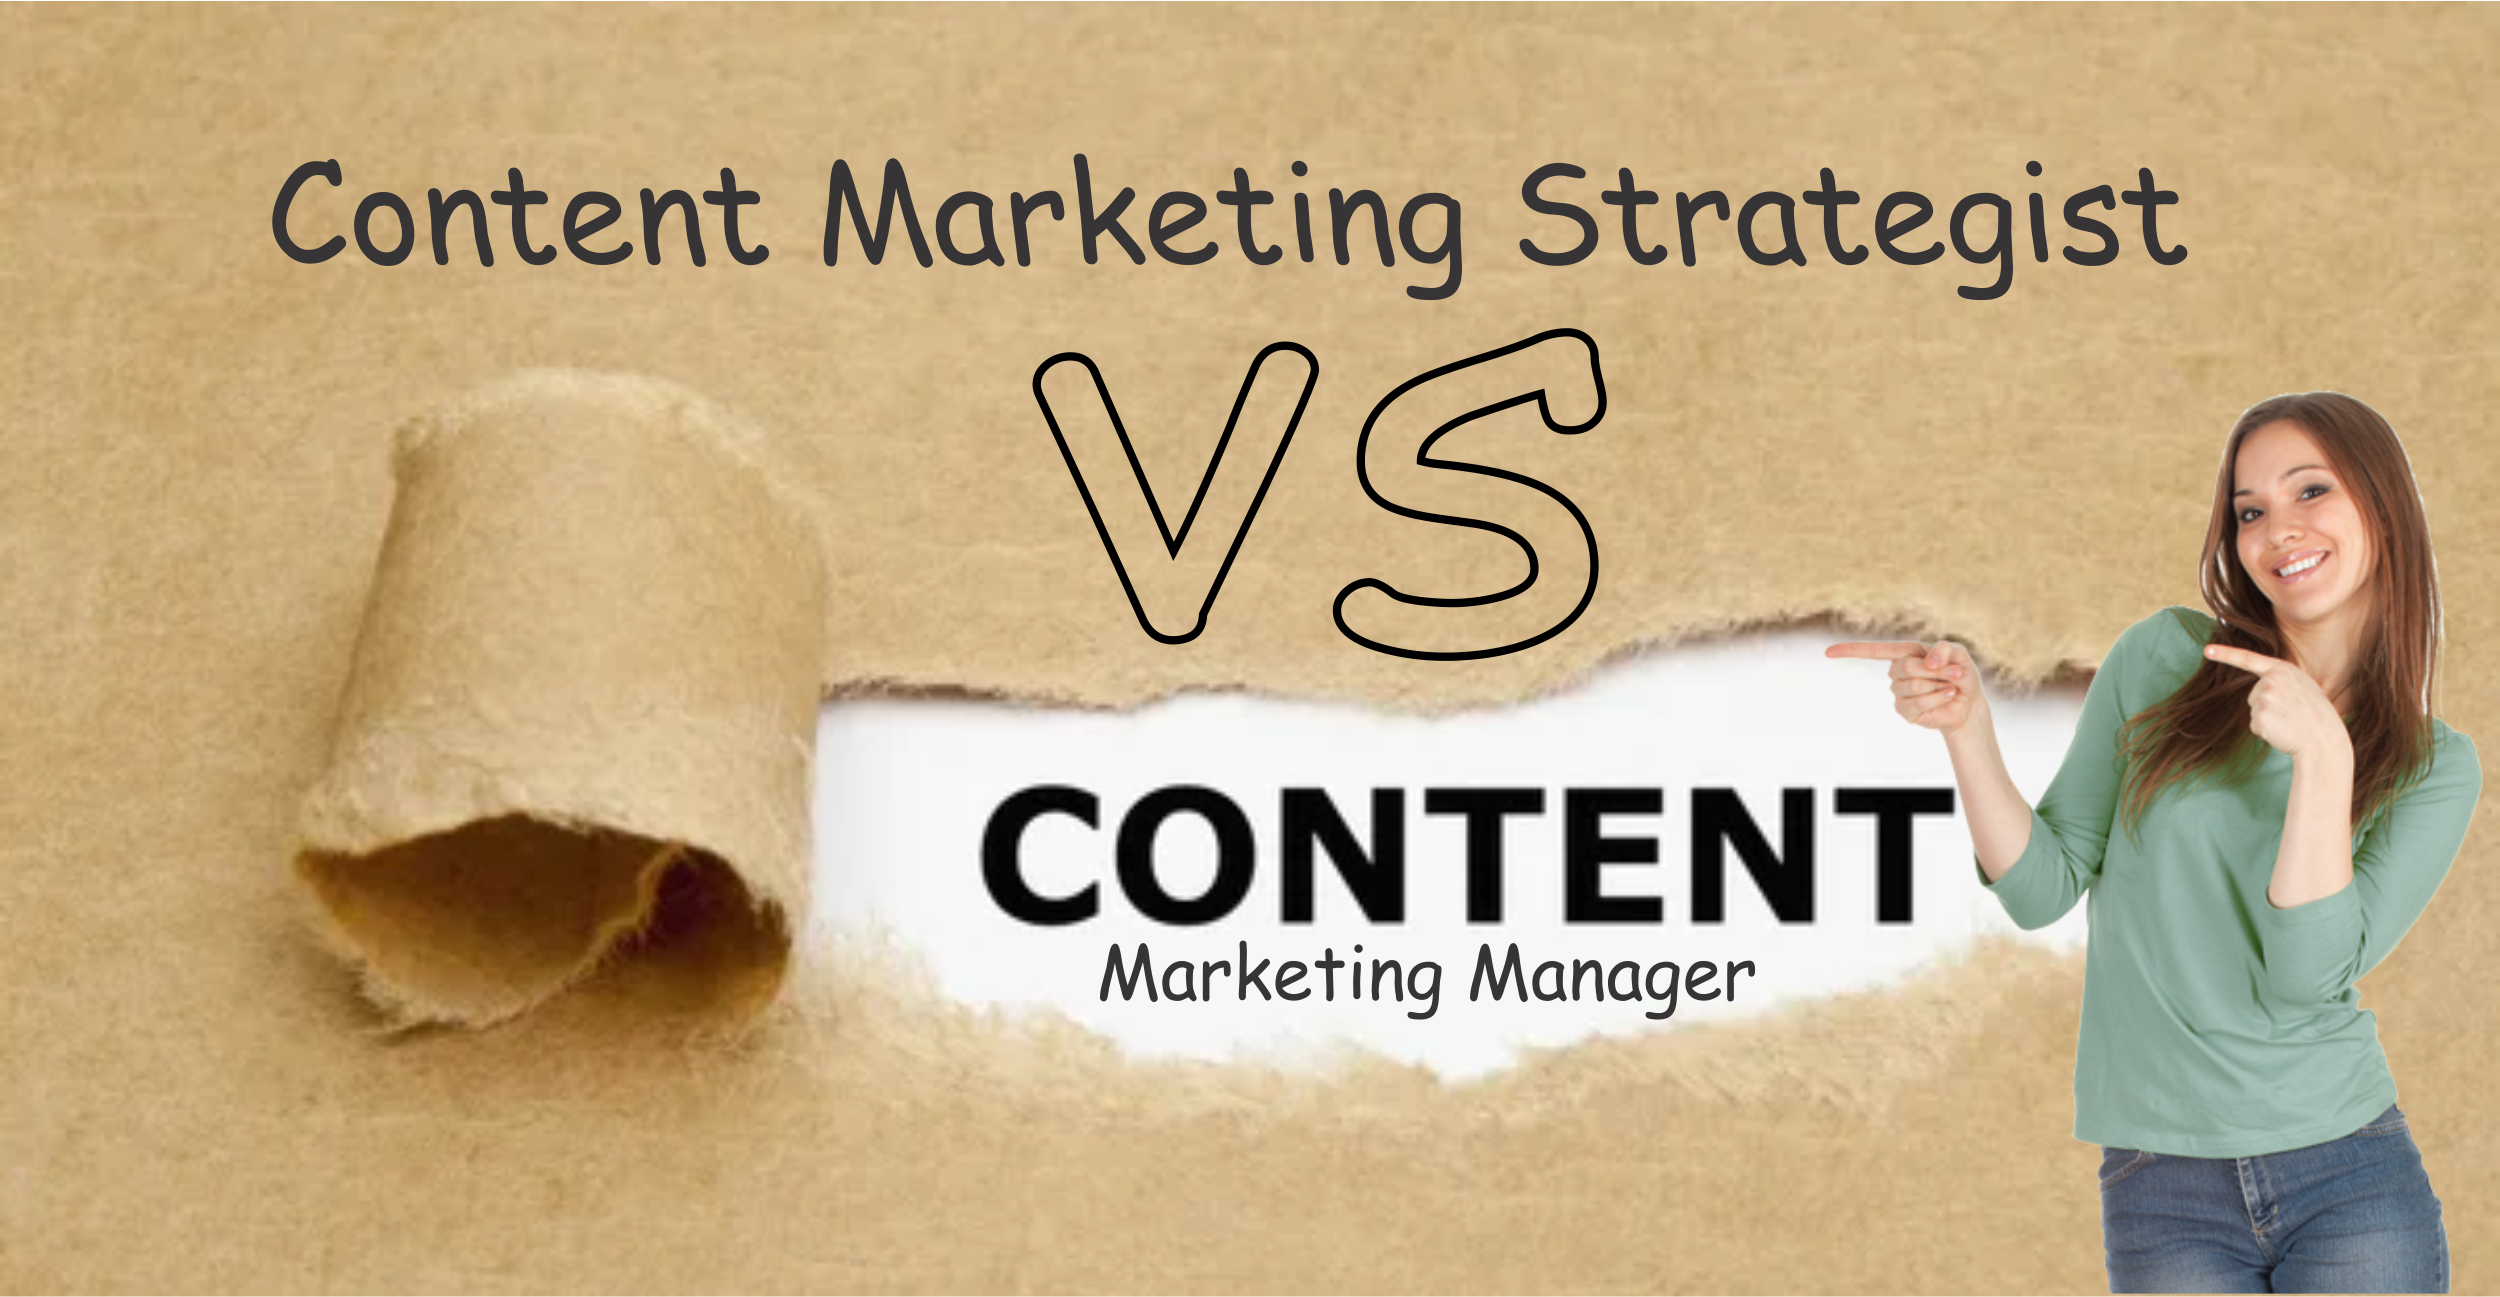 Content Marketing Strategist vs Content Marketing Manager